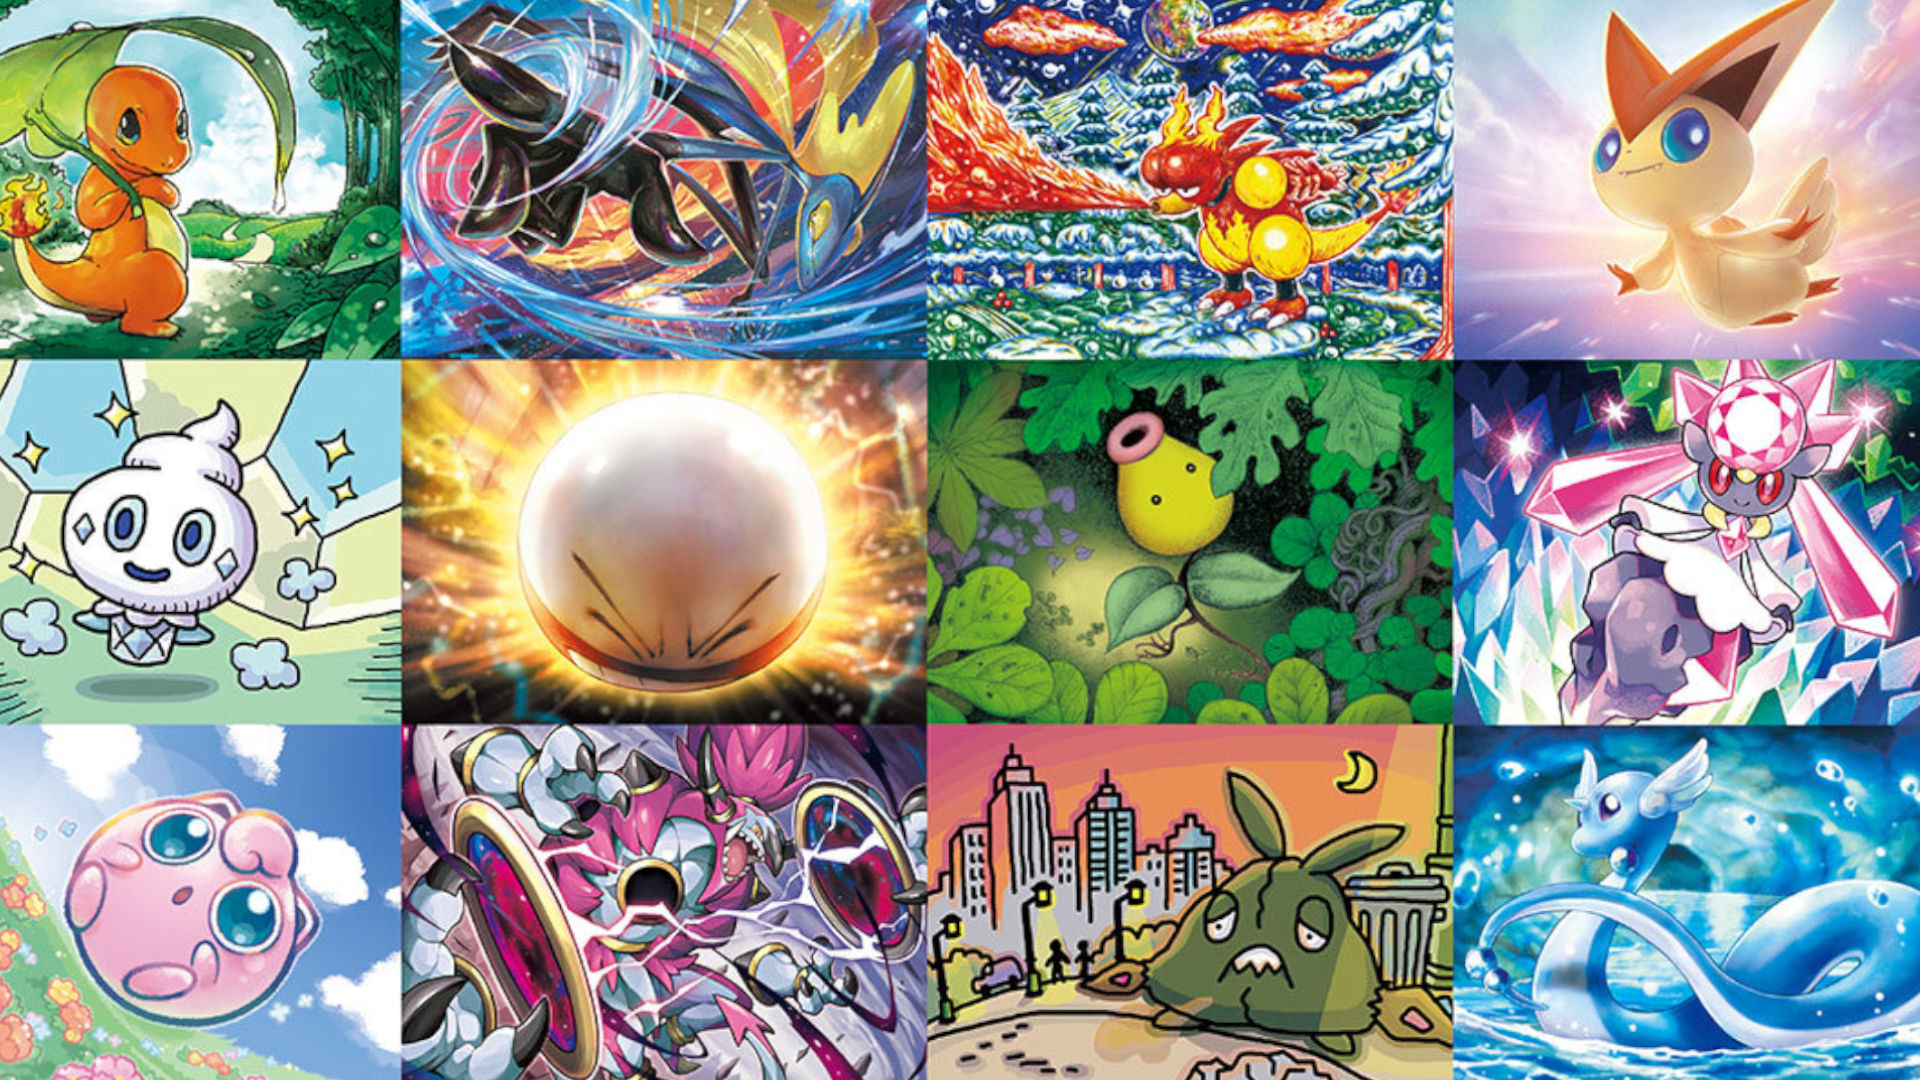 Catch up on 26 of cards with the Pokémon Online Exhibition | Pocket Tactics